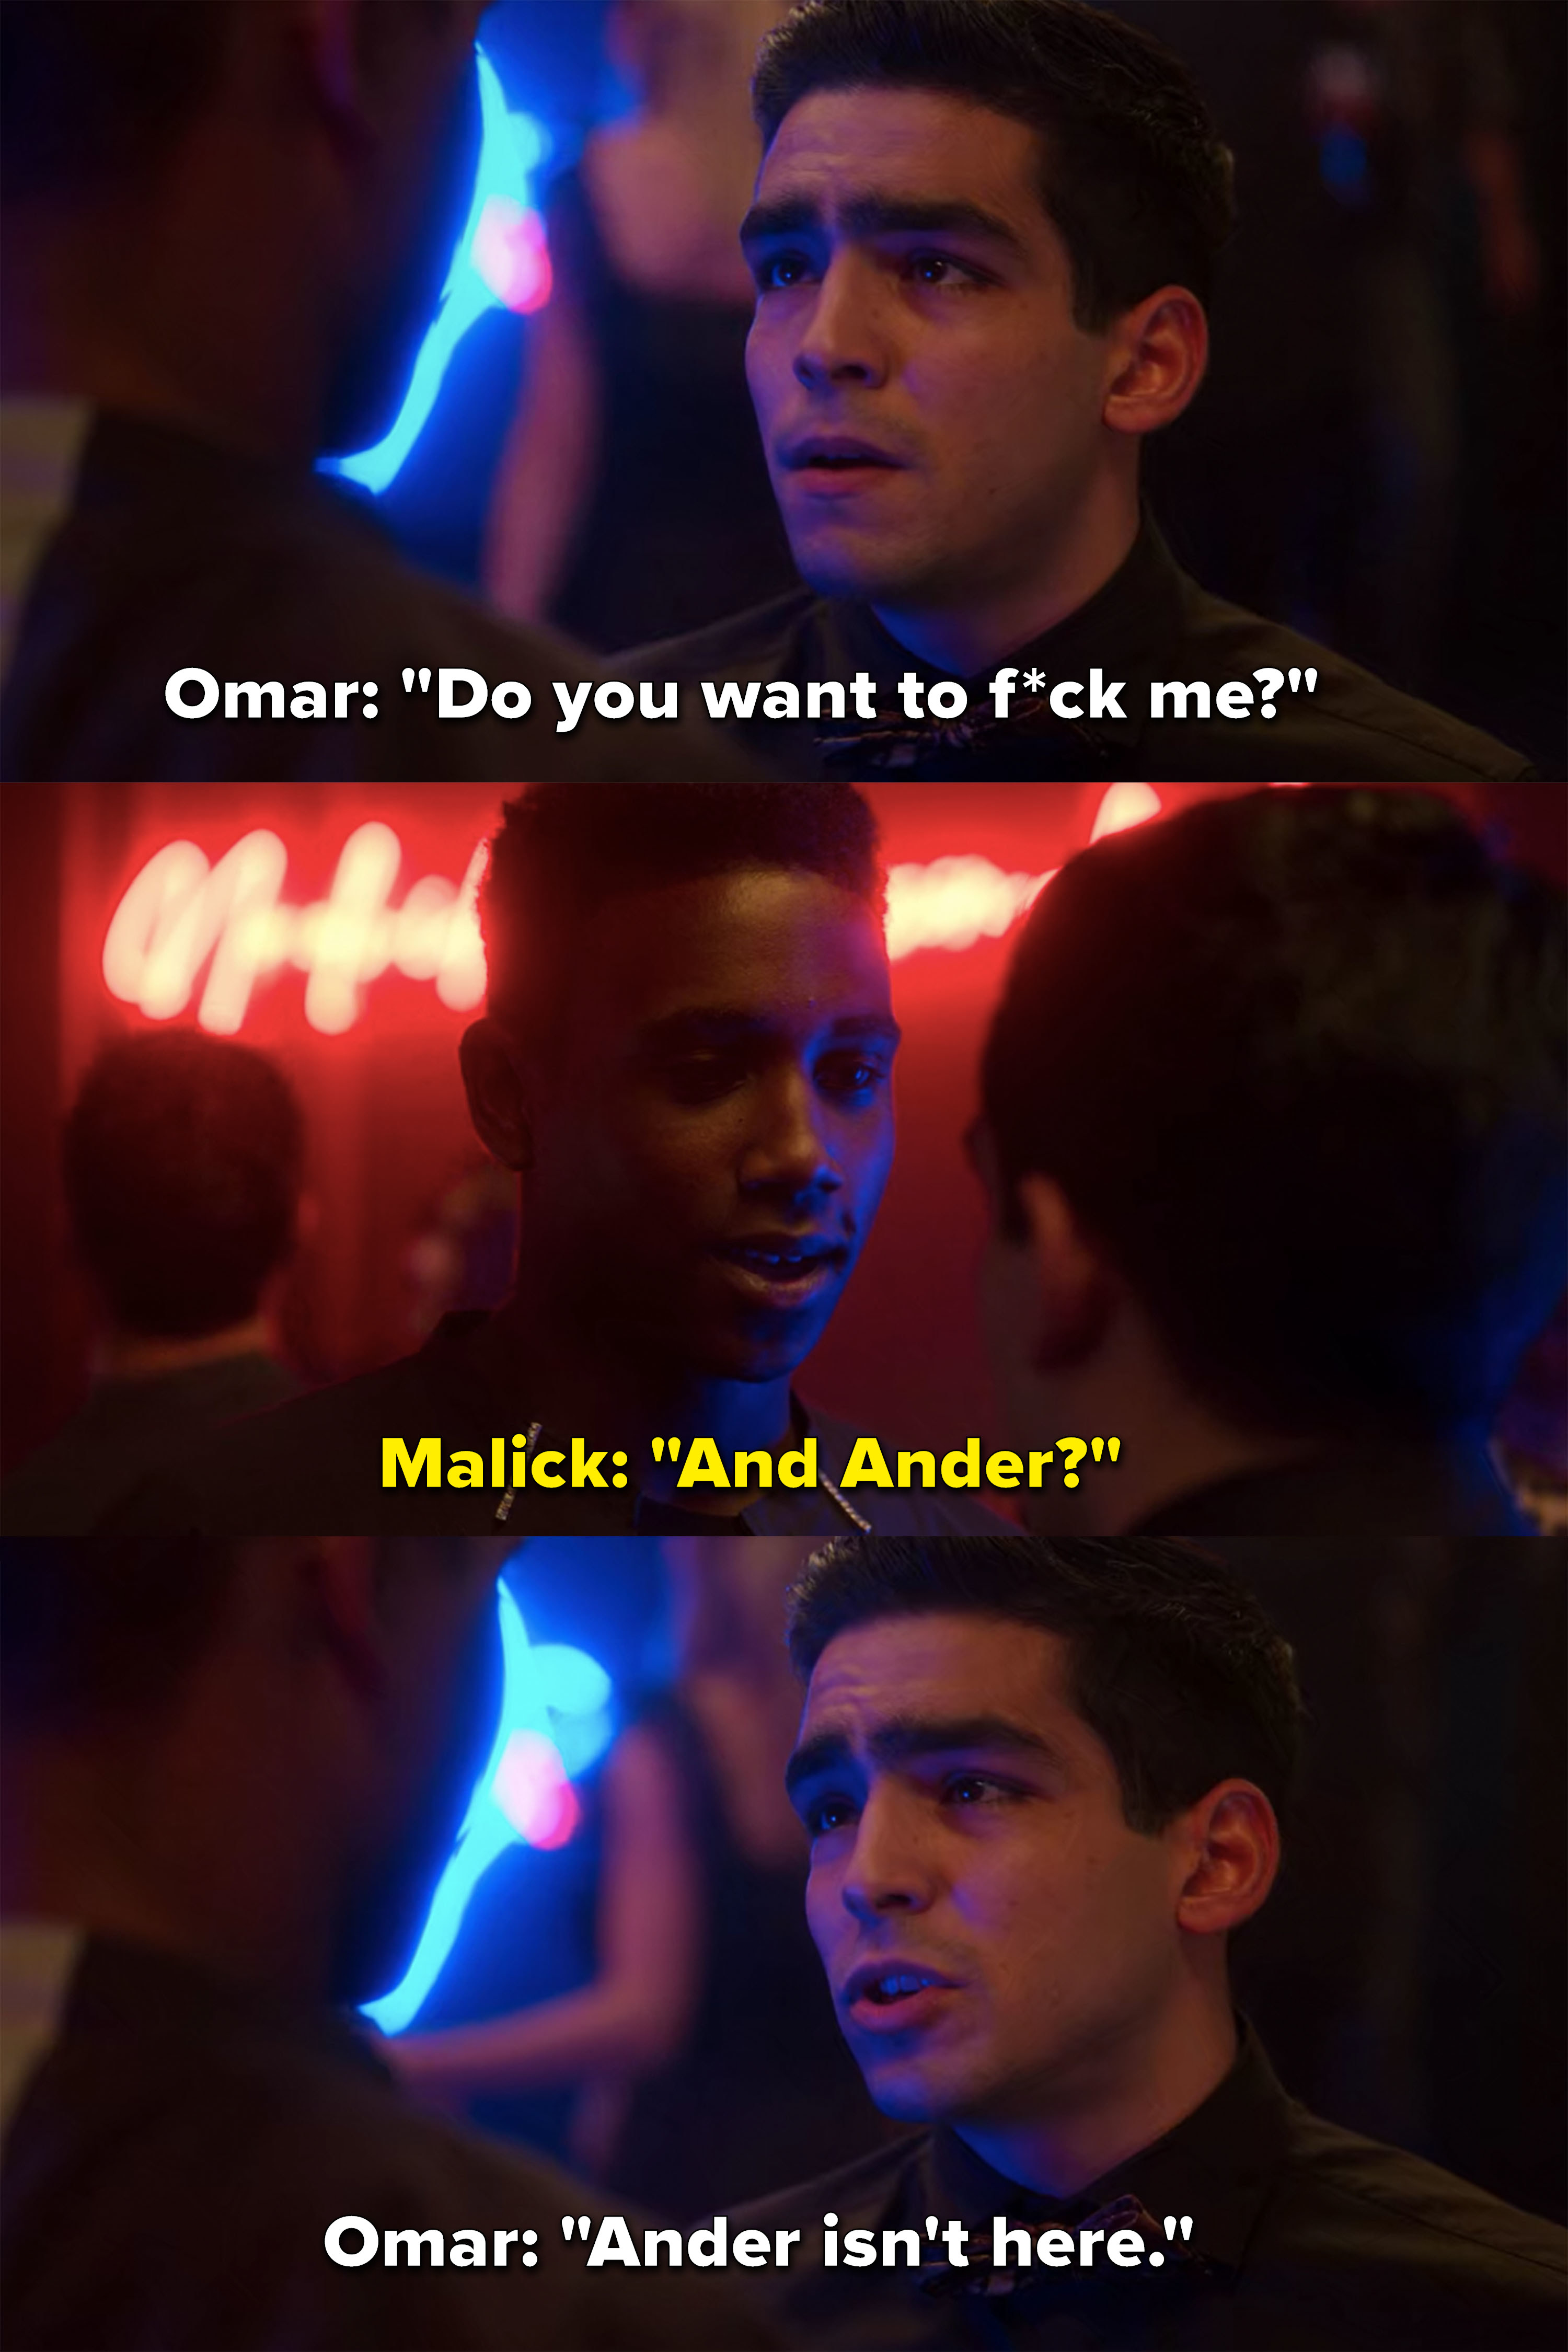 Omar asks Malick to hook up, &quot;Ander isn&#x27;t here&quot;